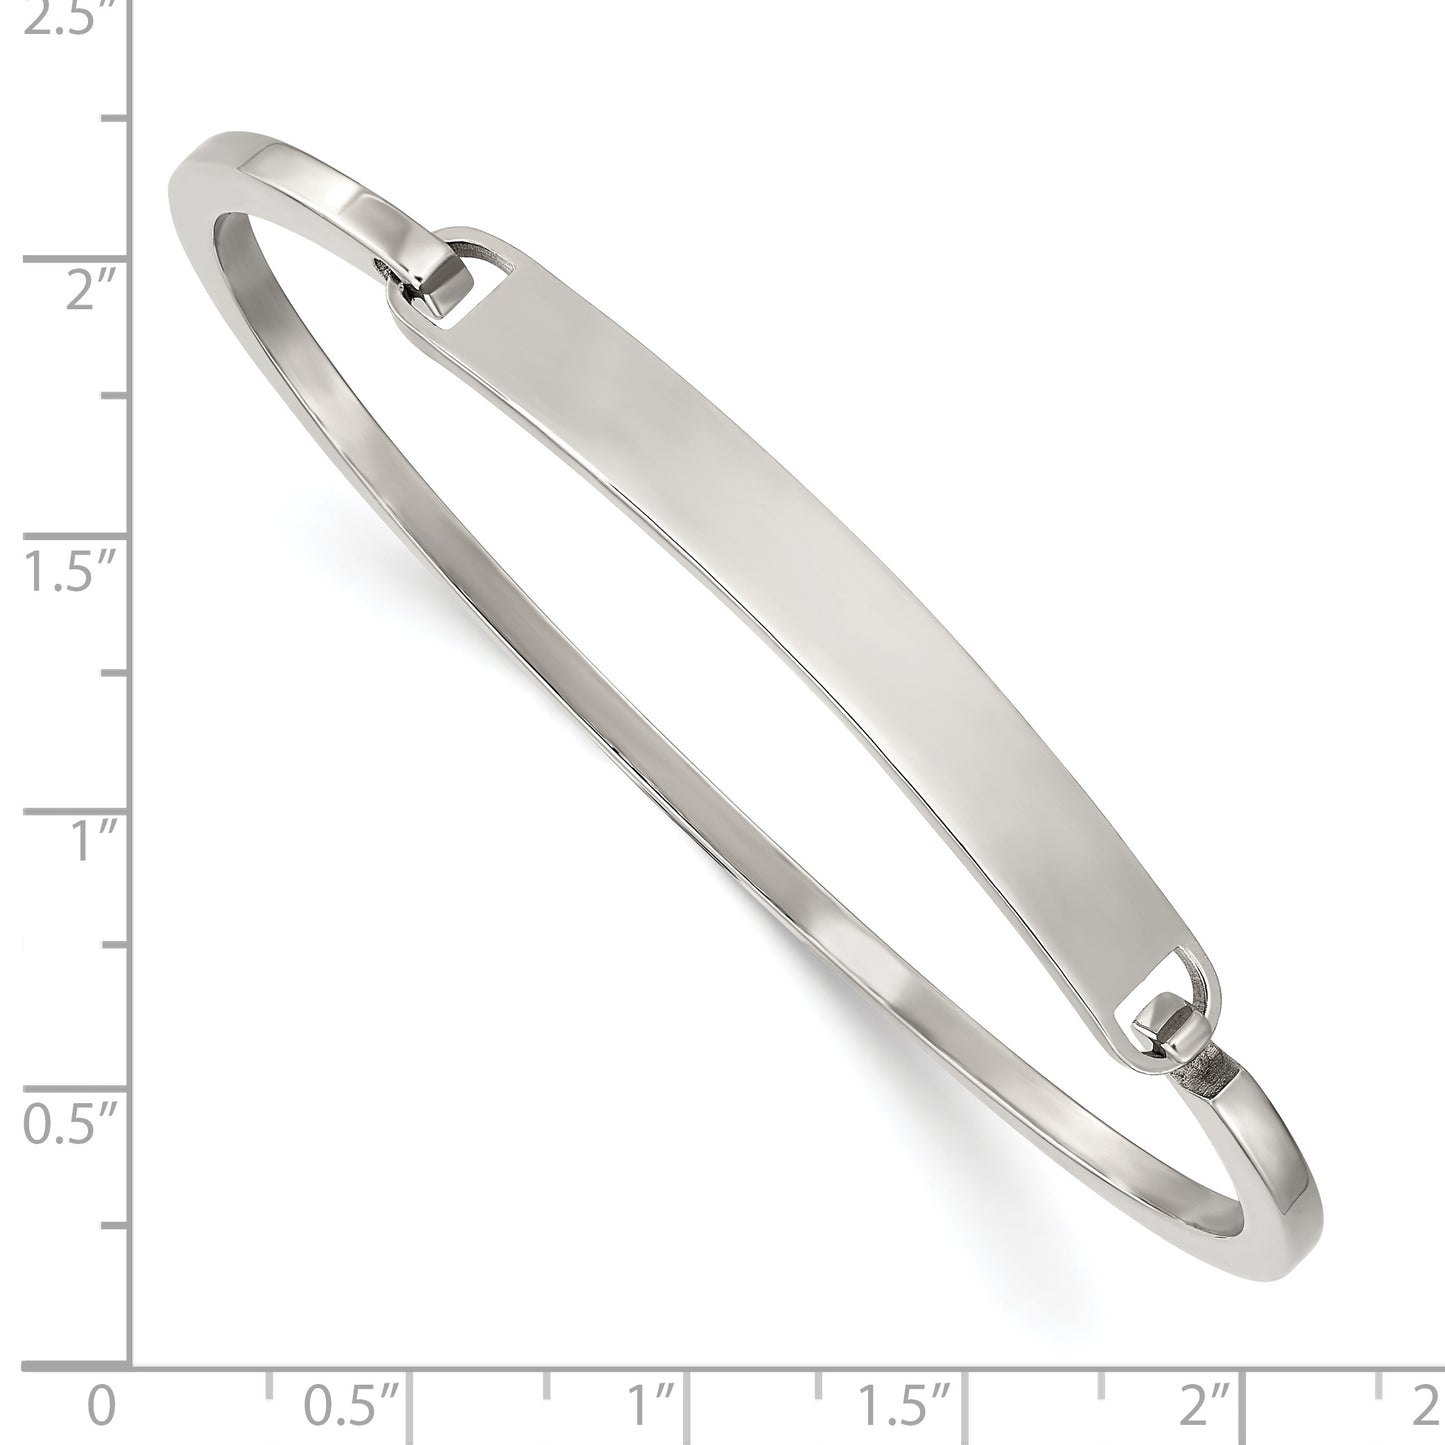 Chisel Stainless Steel Polished 2mm ID Bangle